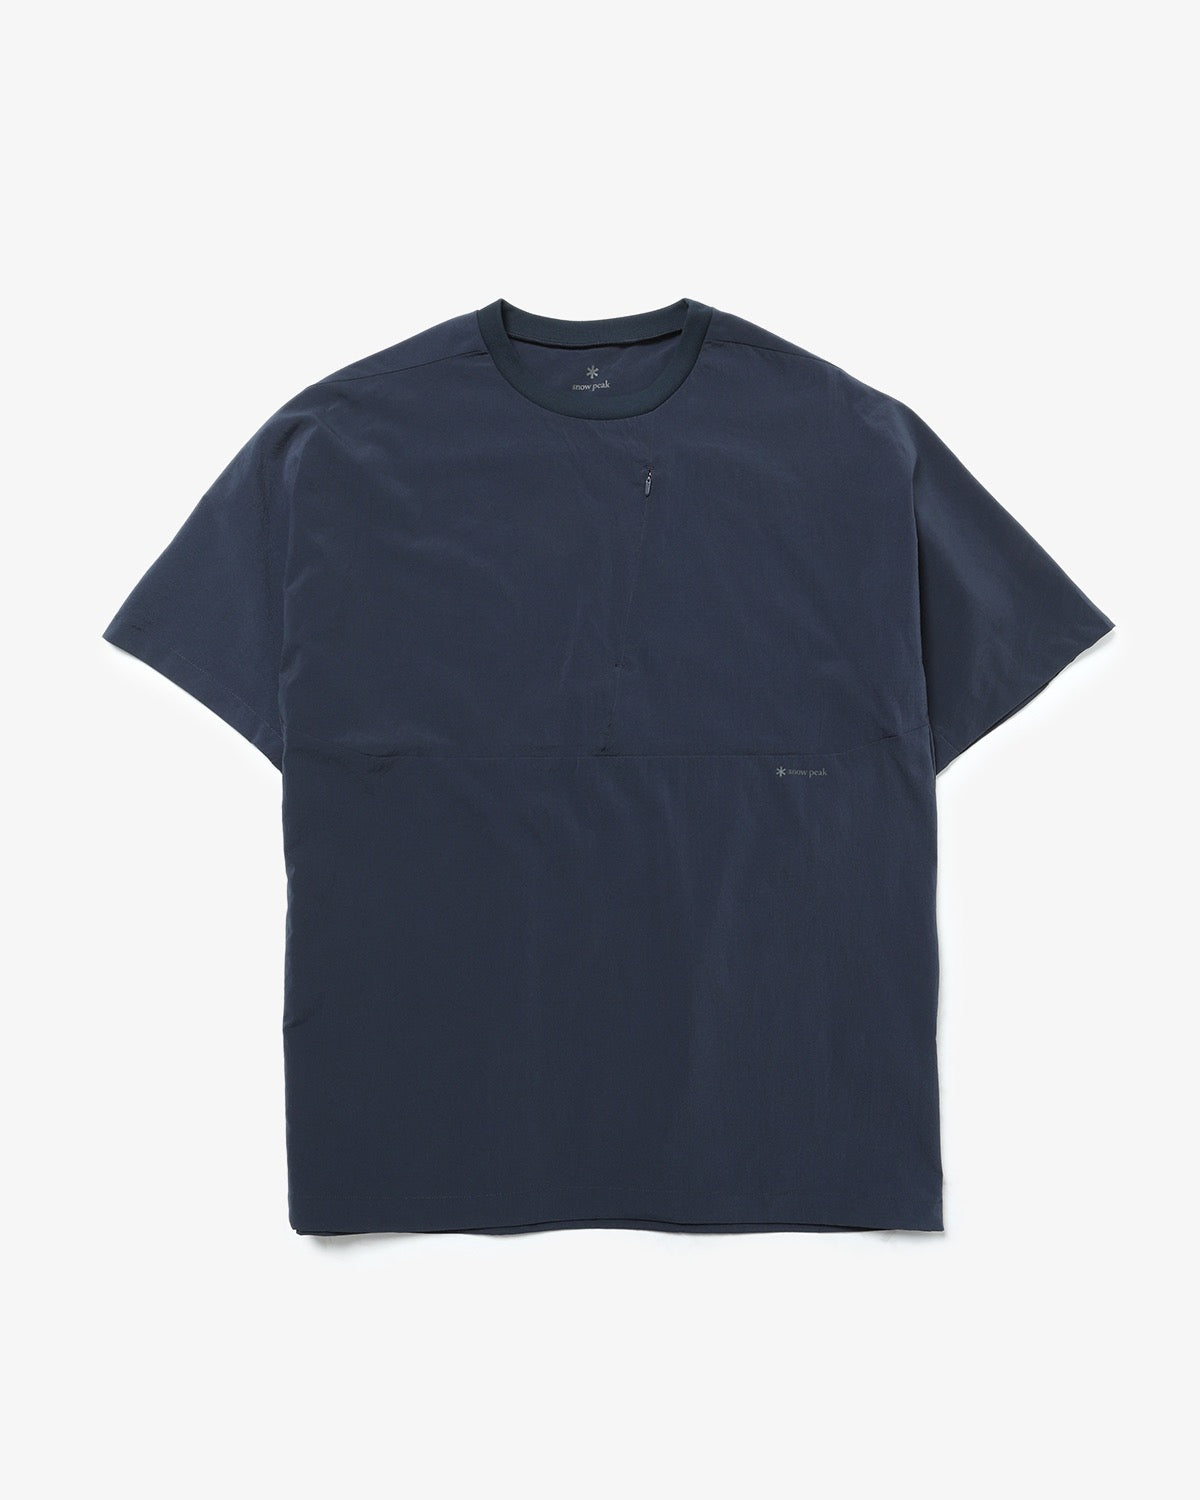 BREATHABLE QUICK DRY T-SHIRT